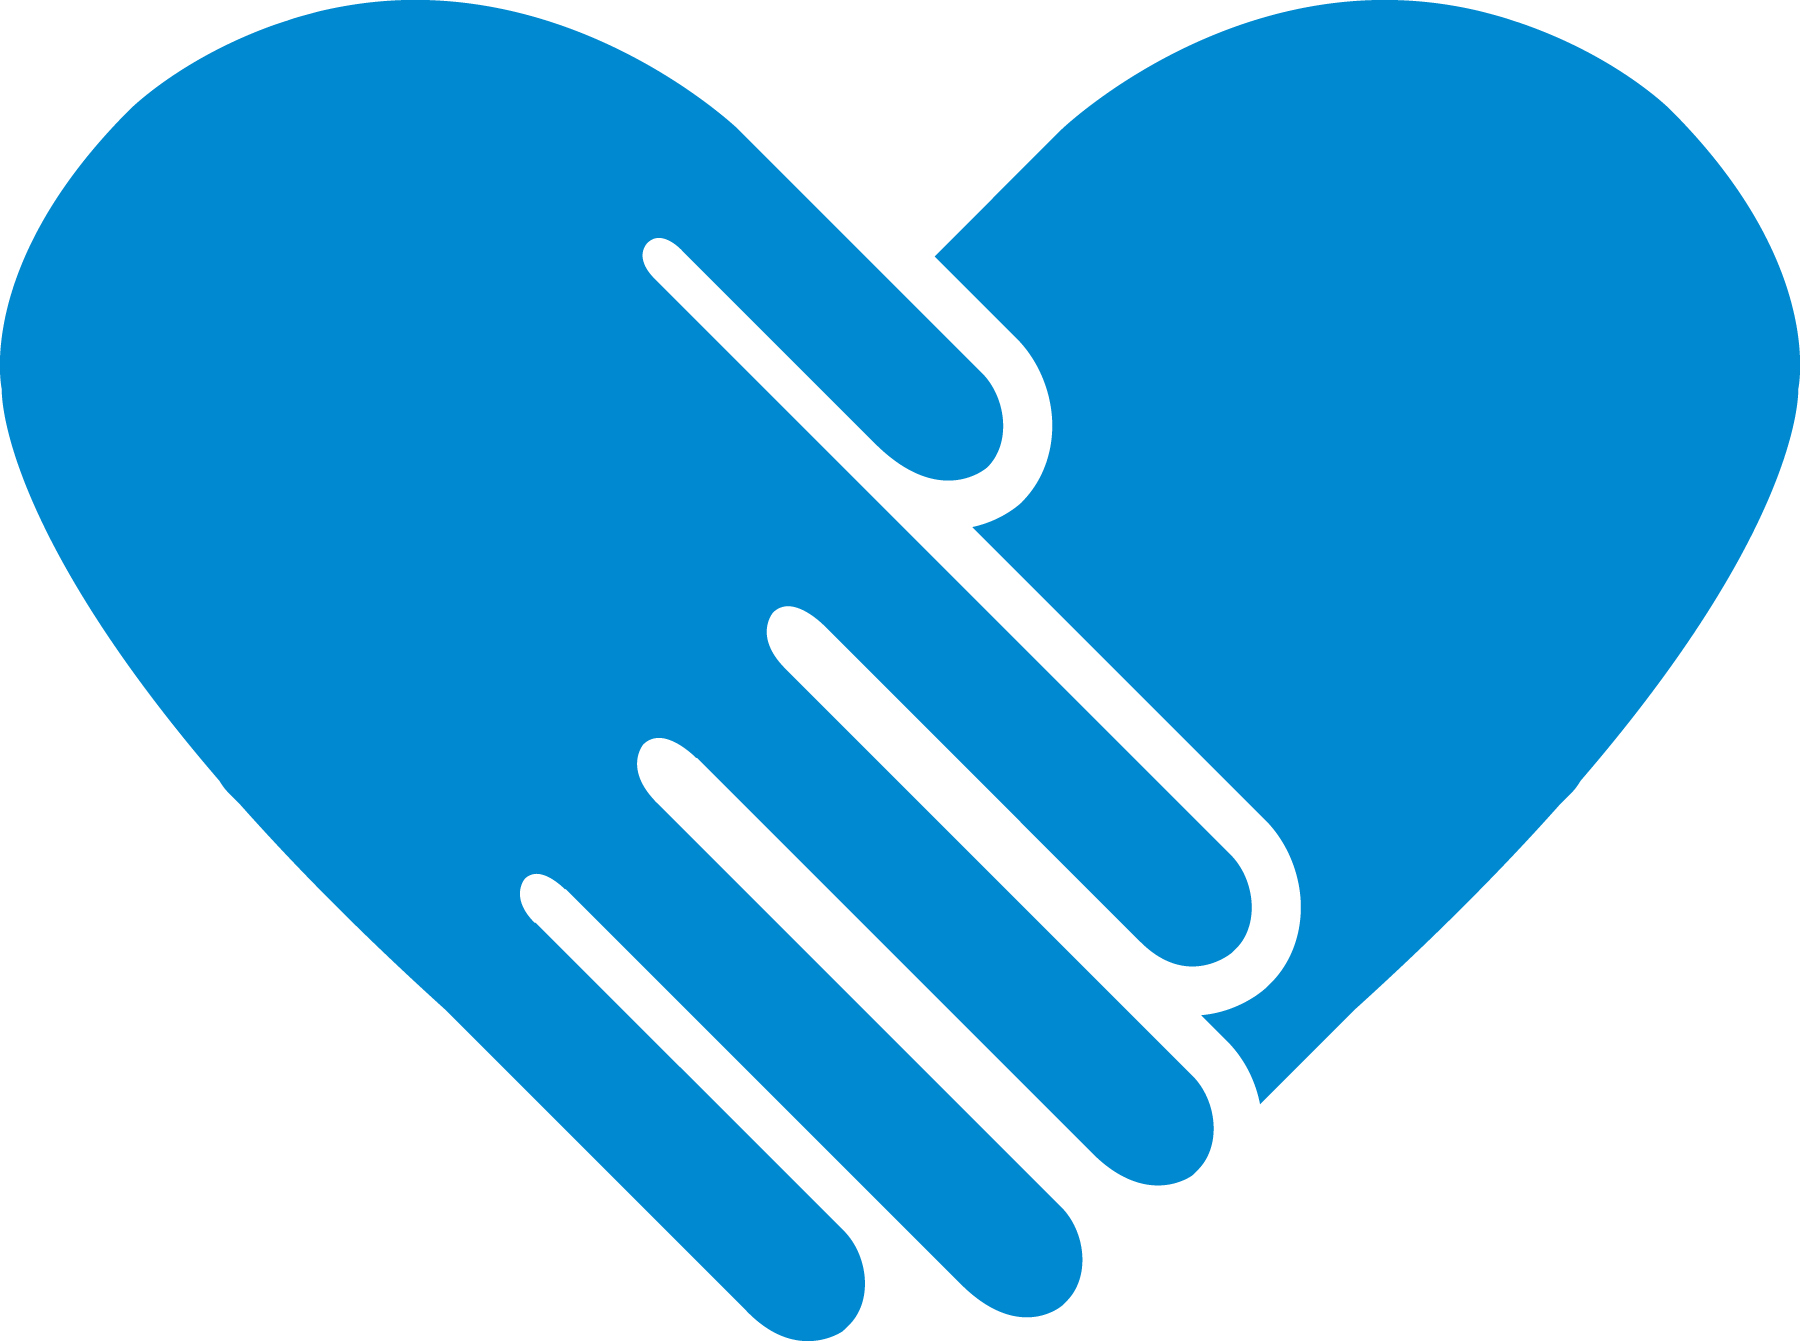 Joined hands in shape of heart blue icon.